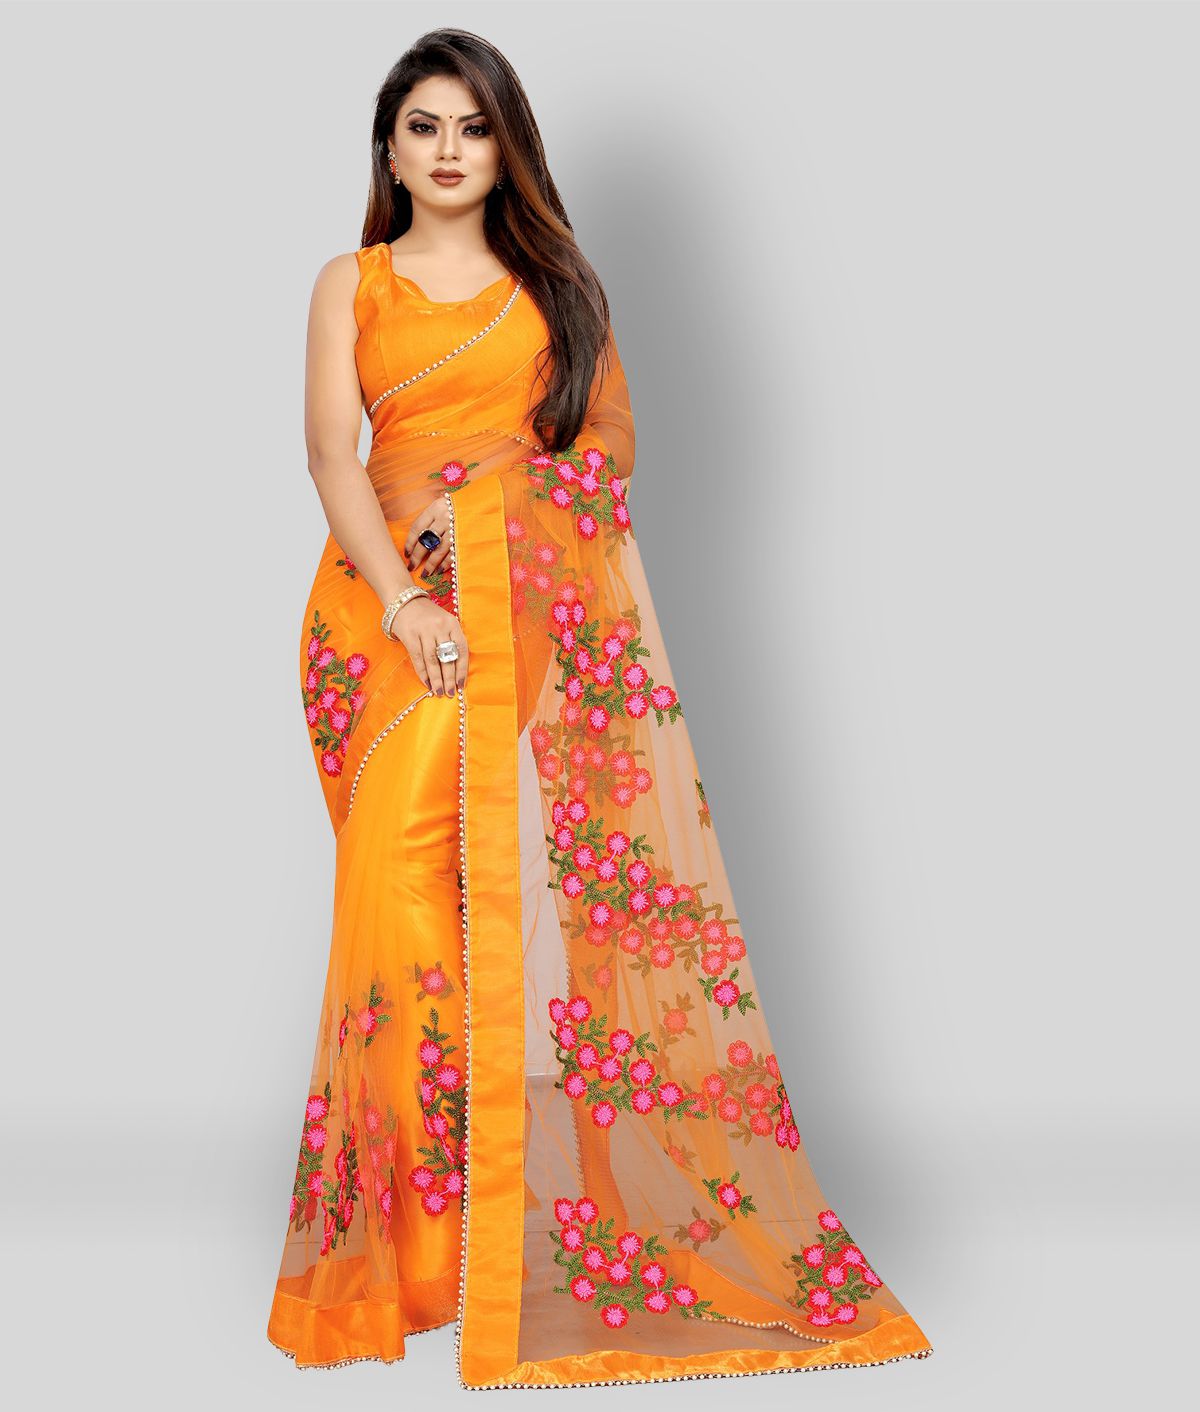     			Gazal Fashions - Yellow Net Saree With Blouse Piece (Pack of 1)